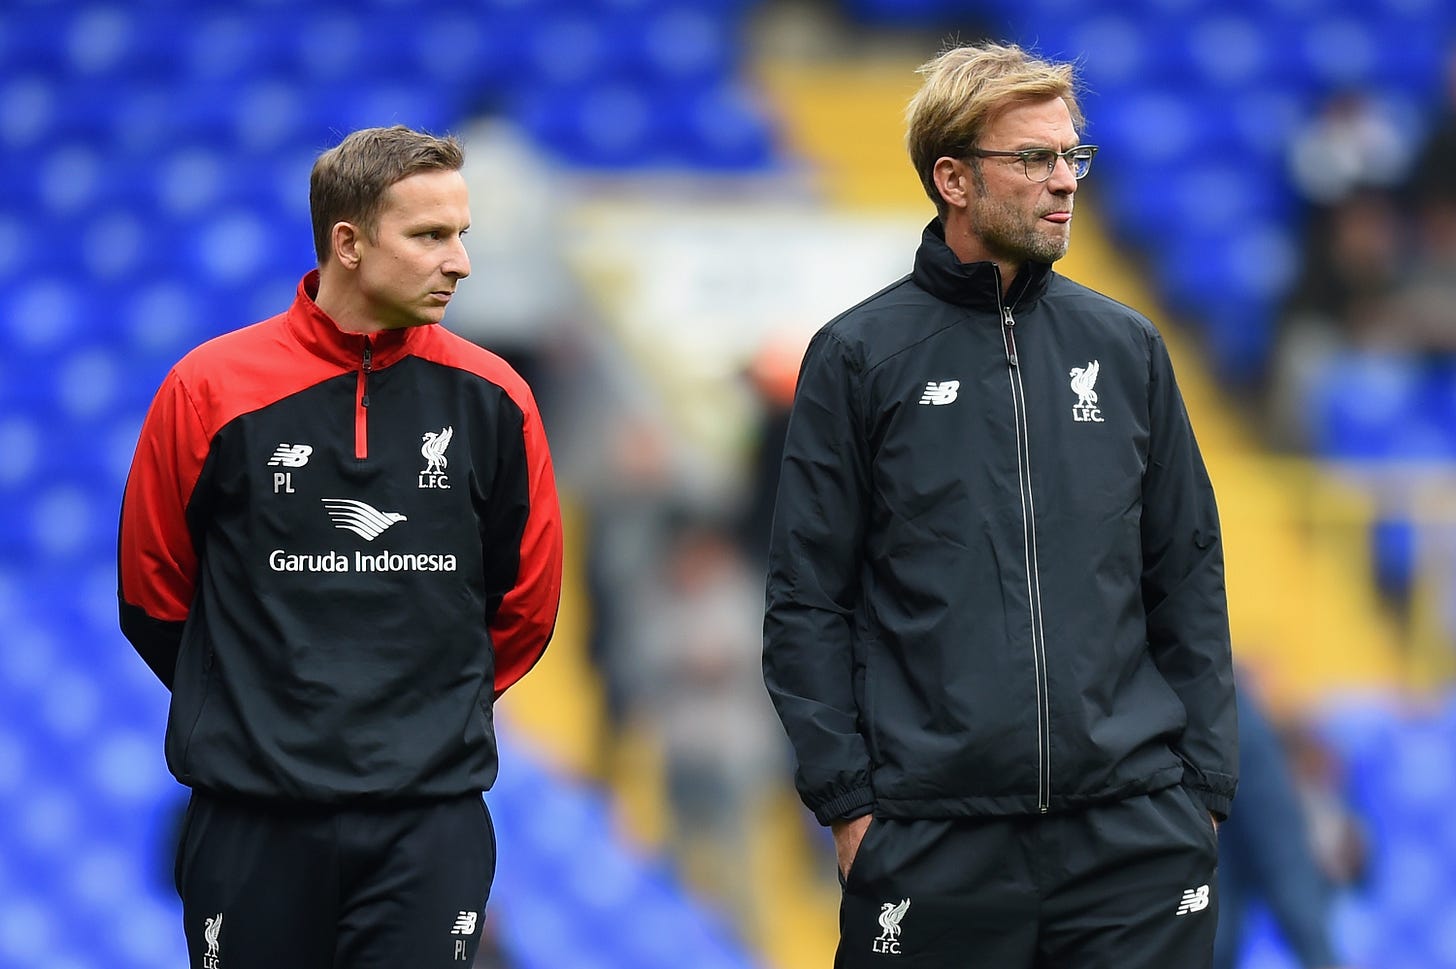 Jurgen Klopp pictured (right) alongside Pepijn Lijnders ahead of his first game as Liverpool manager back in 2015